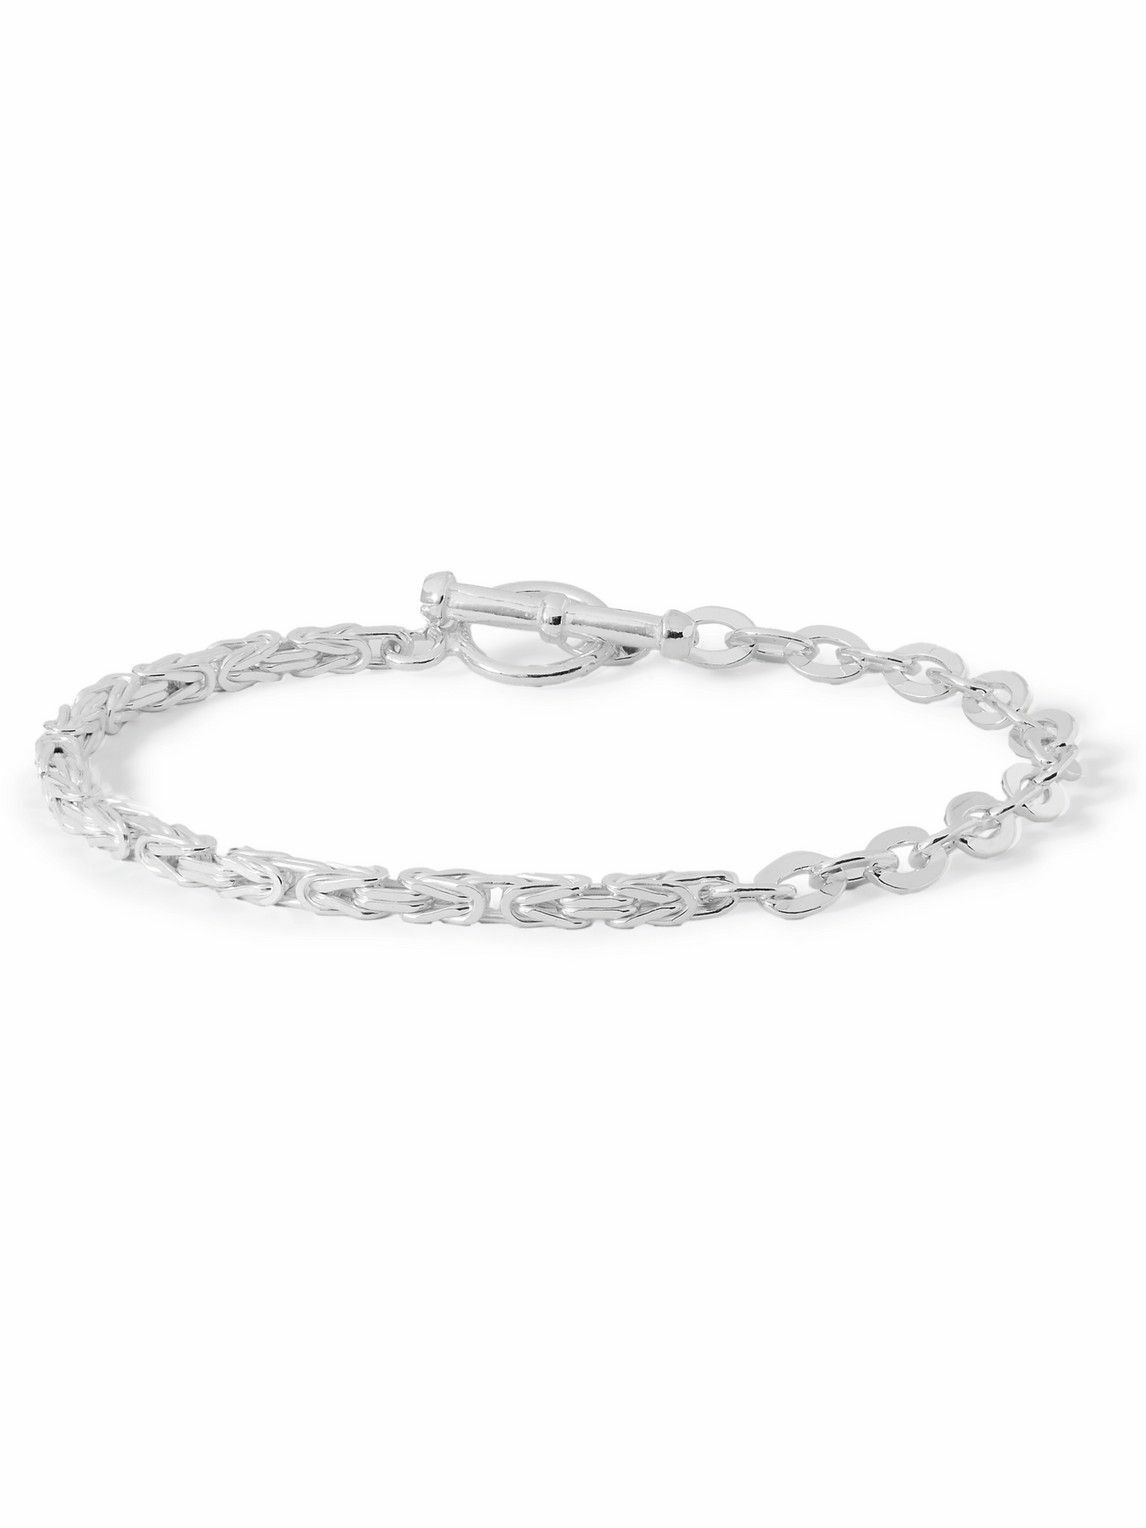 Alice Made This - Romeo and Juliet Sterling Silver Chain Bracelet Alice ...